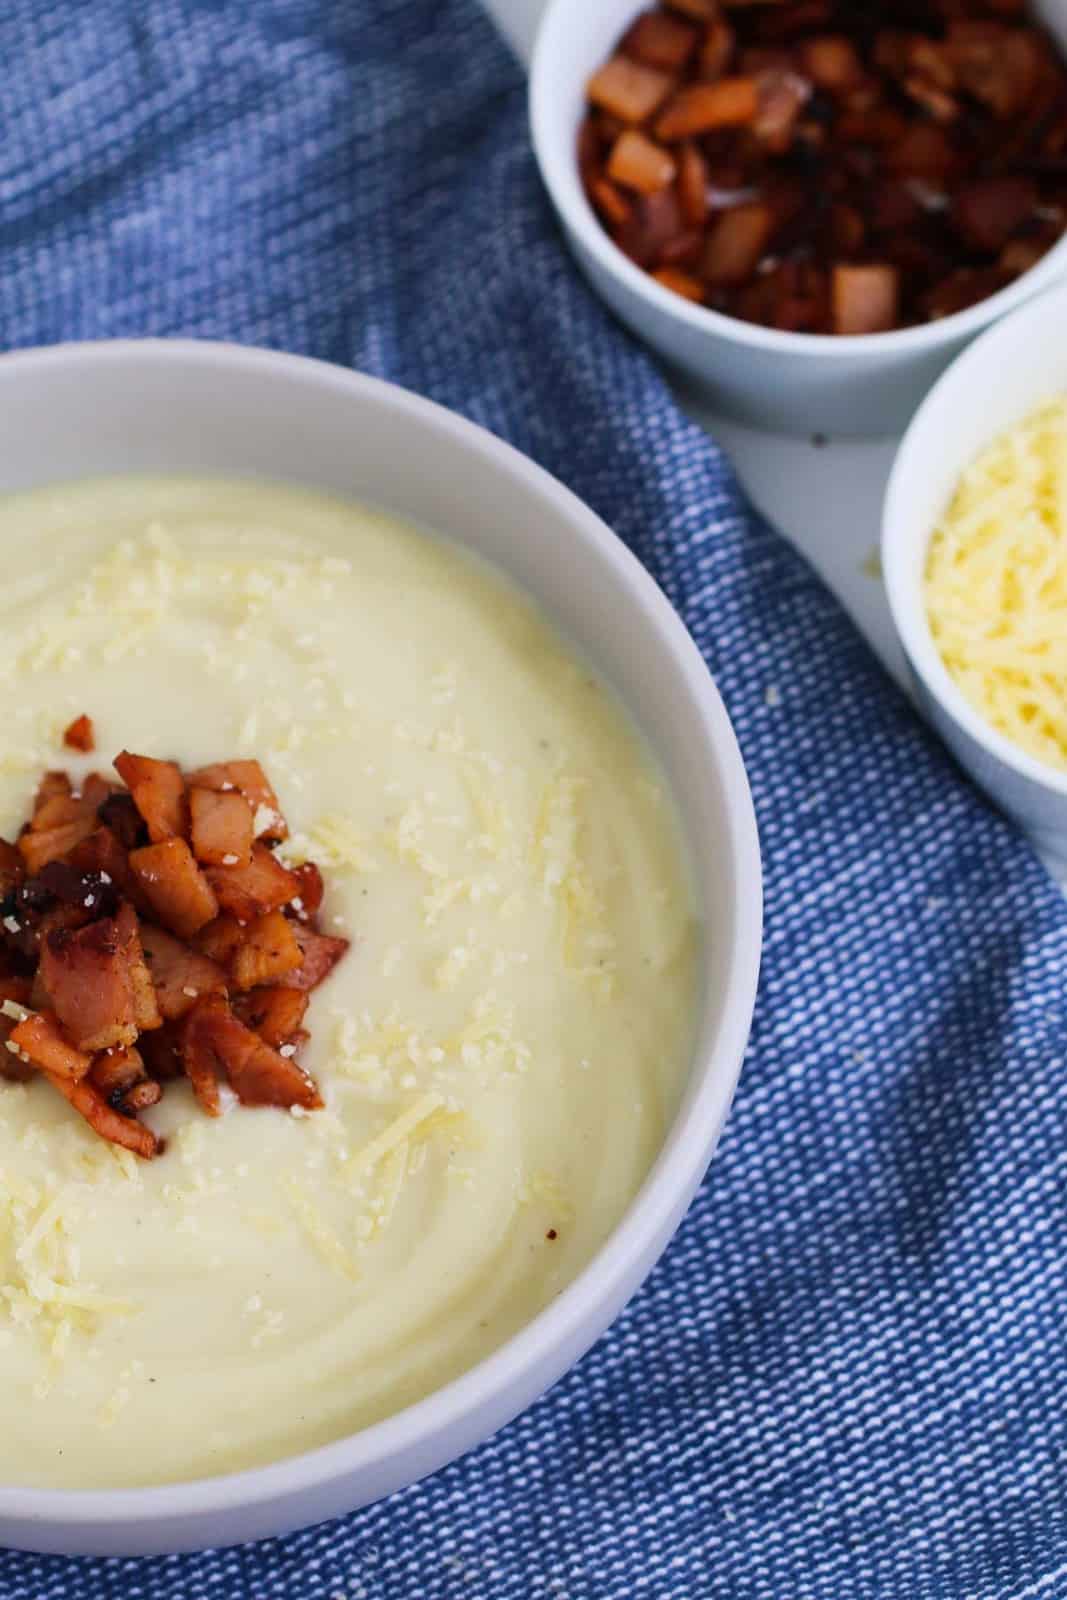 Pieces of crispy bacon on top of a bowl of cauliflower soup with parmesan cheese.